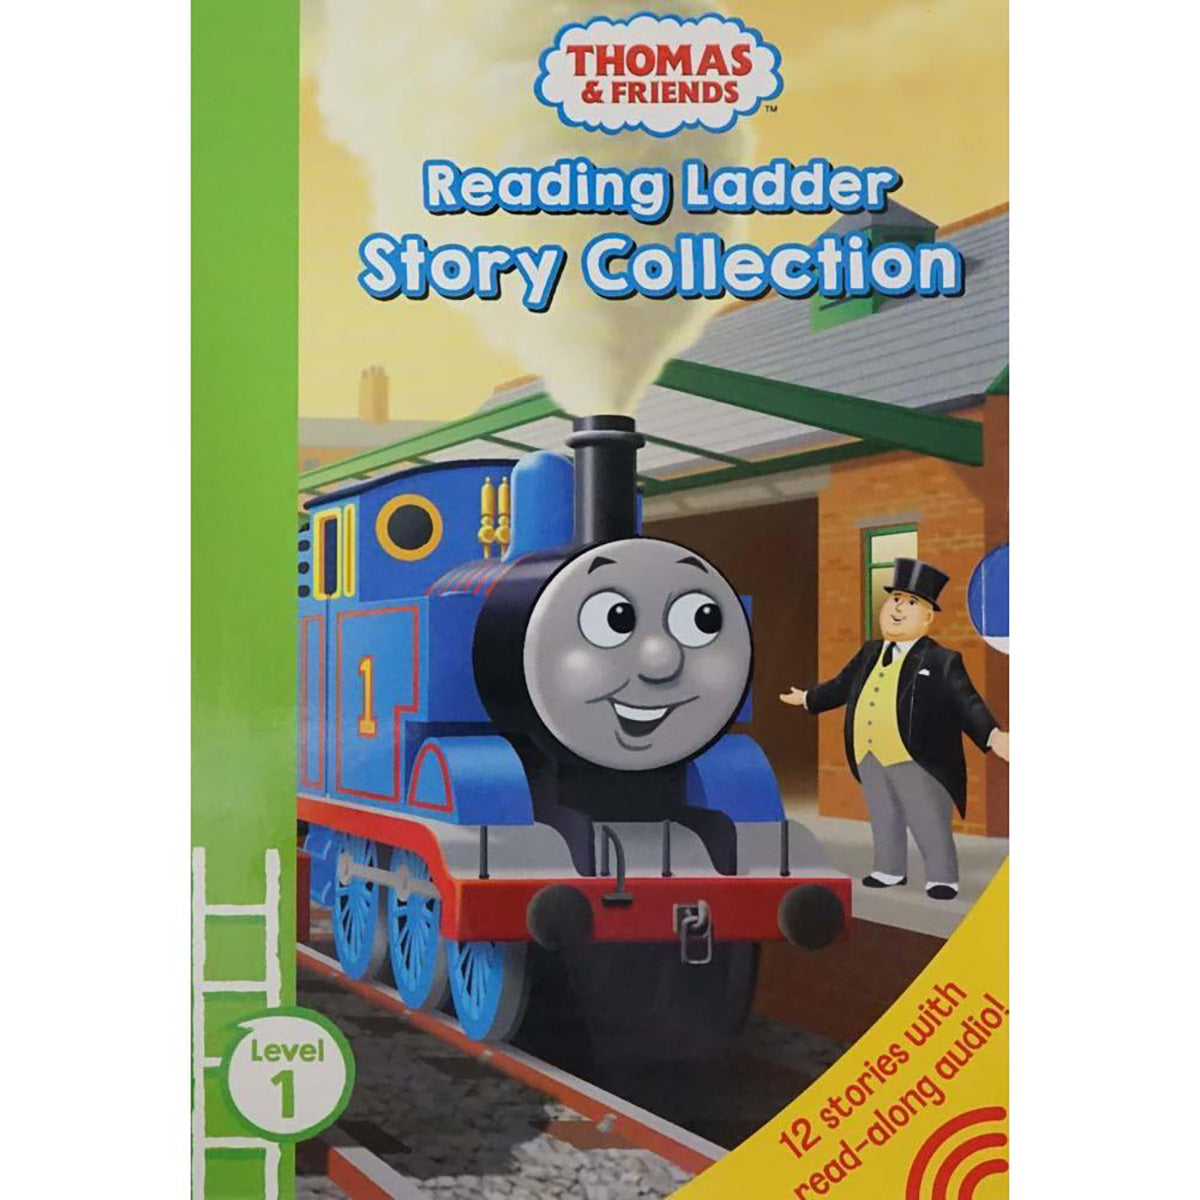 Thomas & Friends Reading Ladder Story Collection Bookset